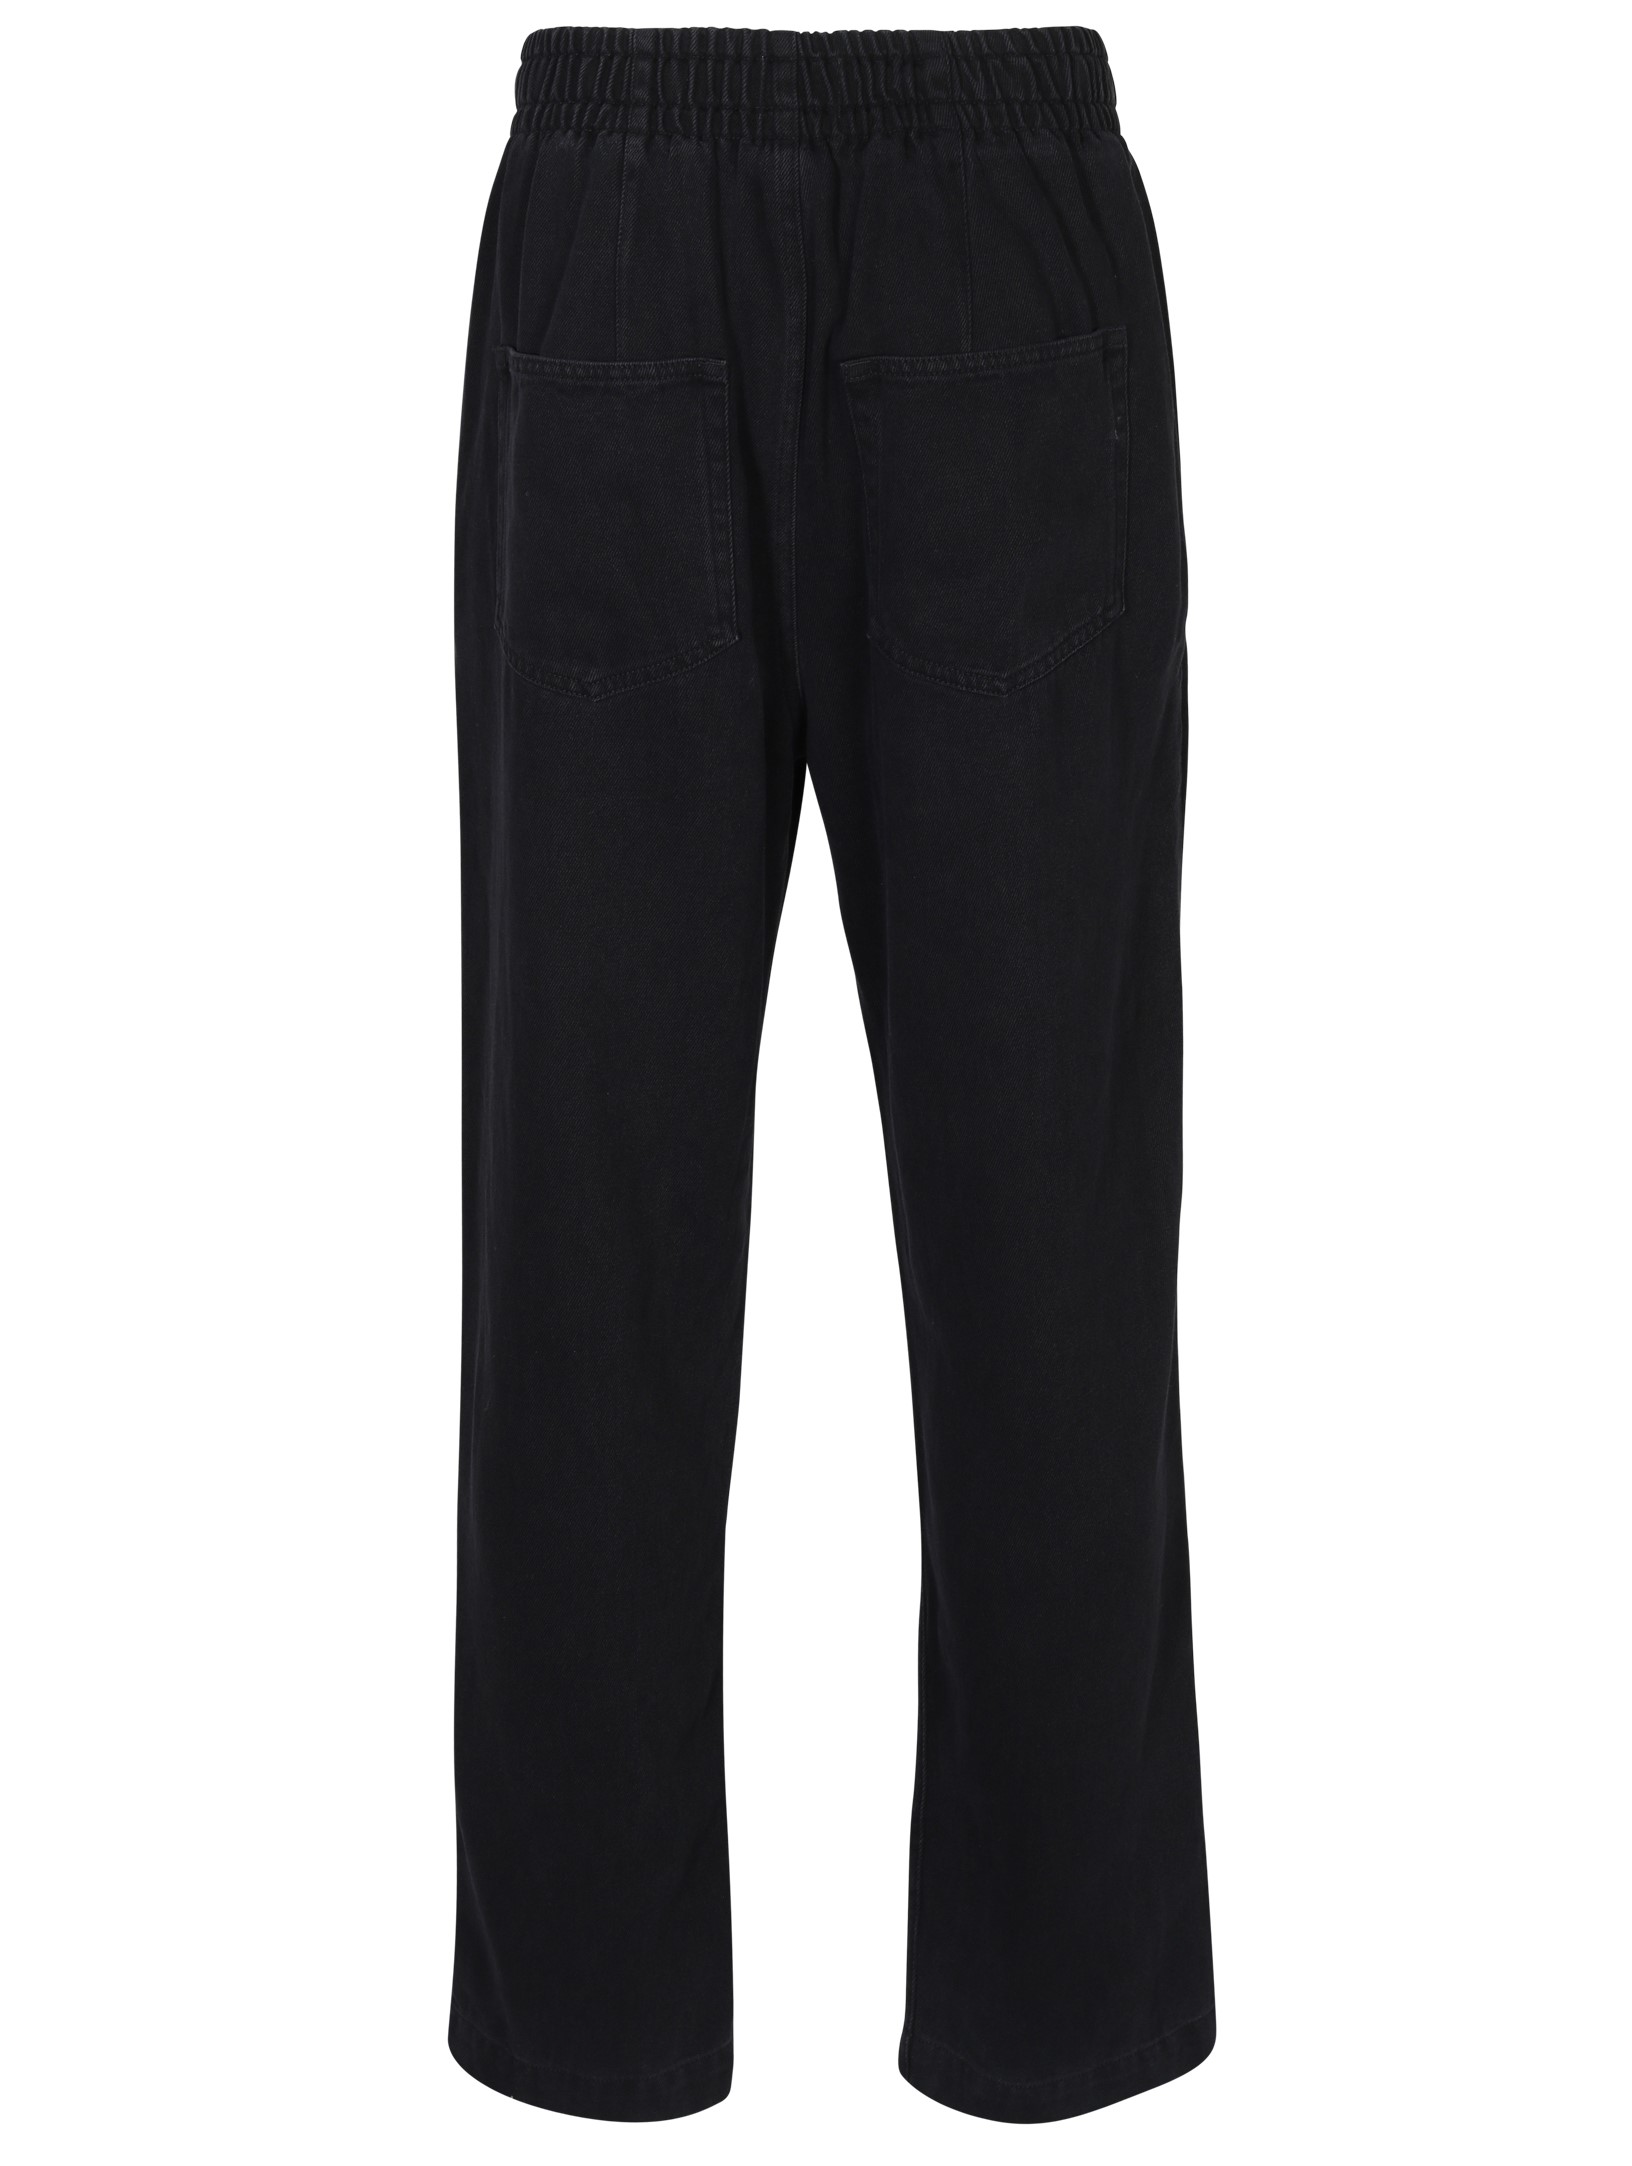 ISABEL MARANT Timeo Pant in Faded Black L